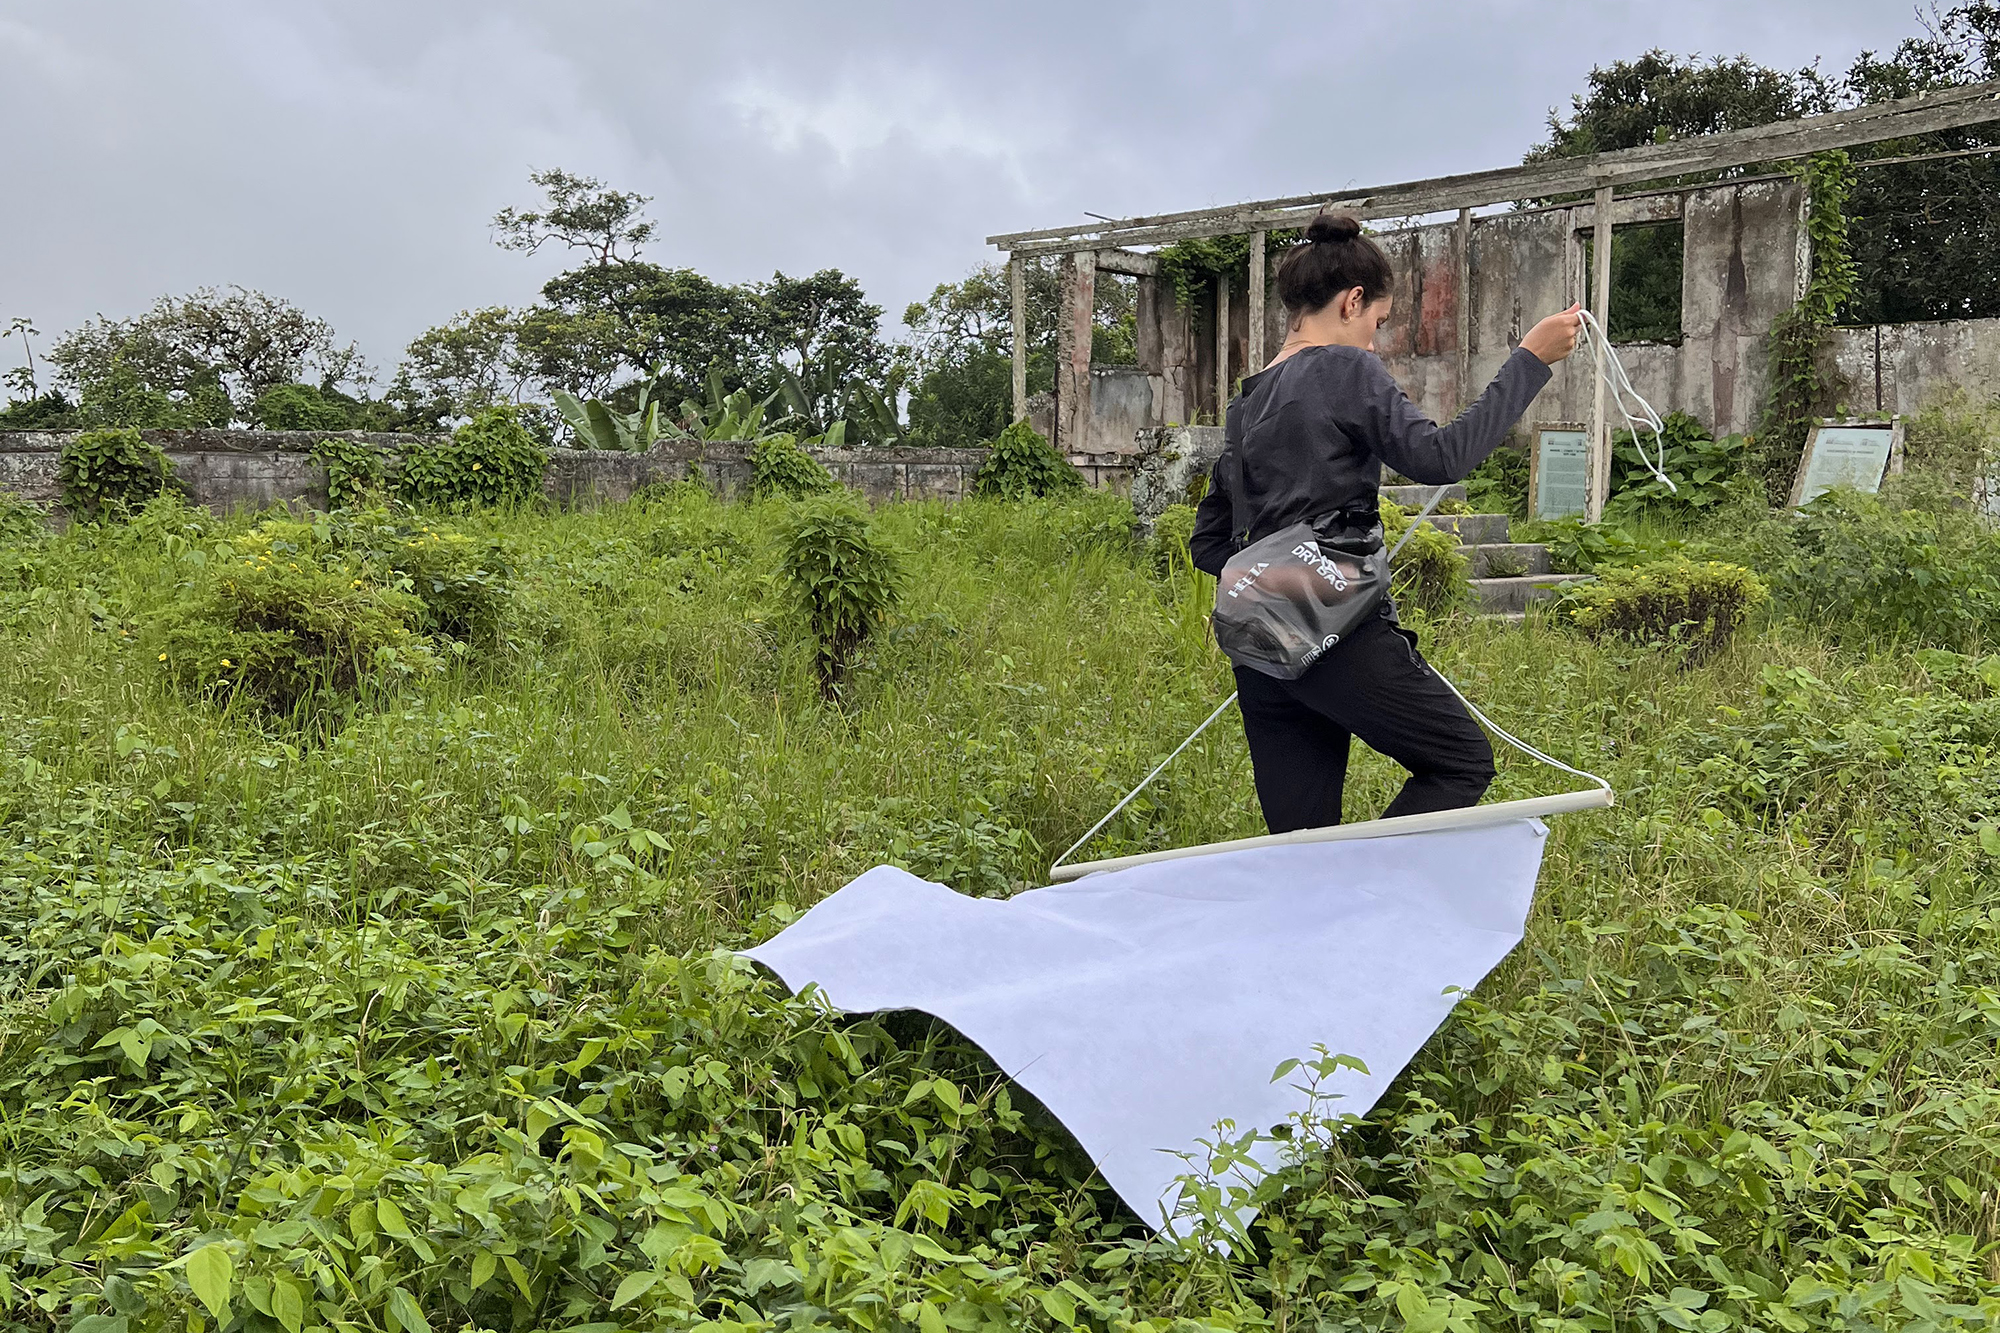 Field researcher dragging a white cloth tick drag over ground foliage